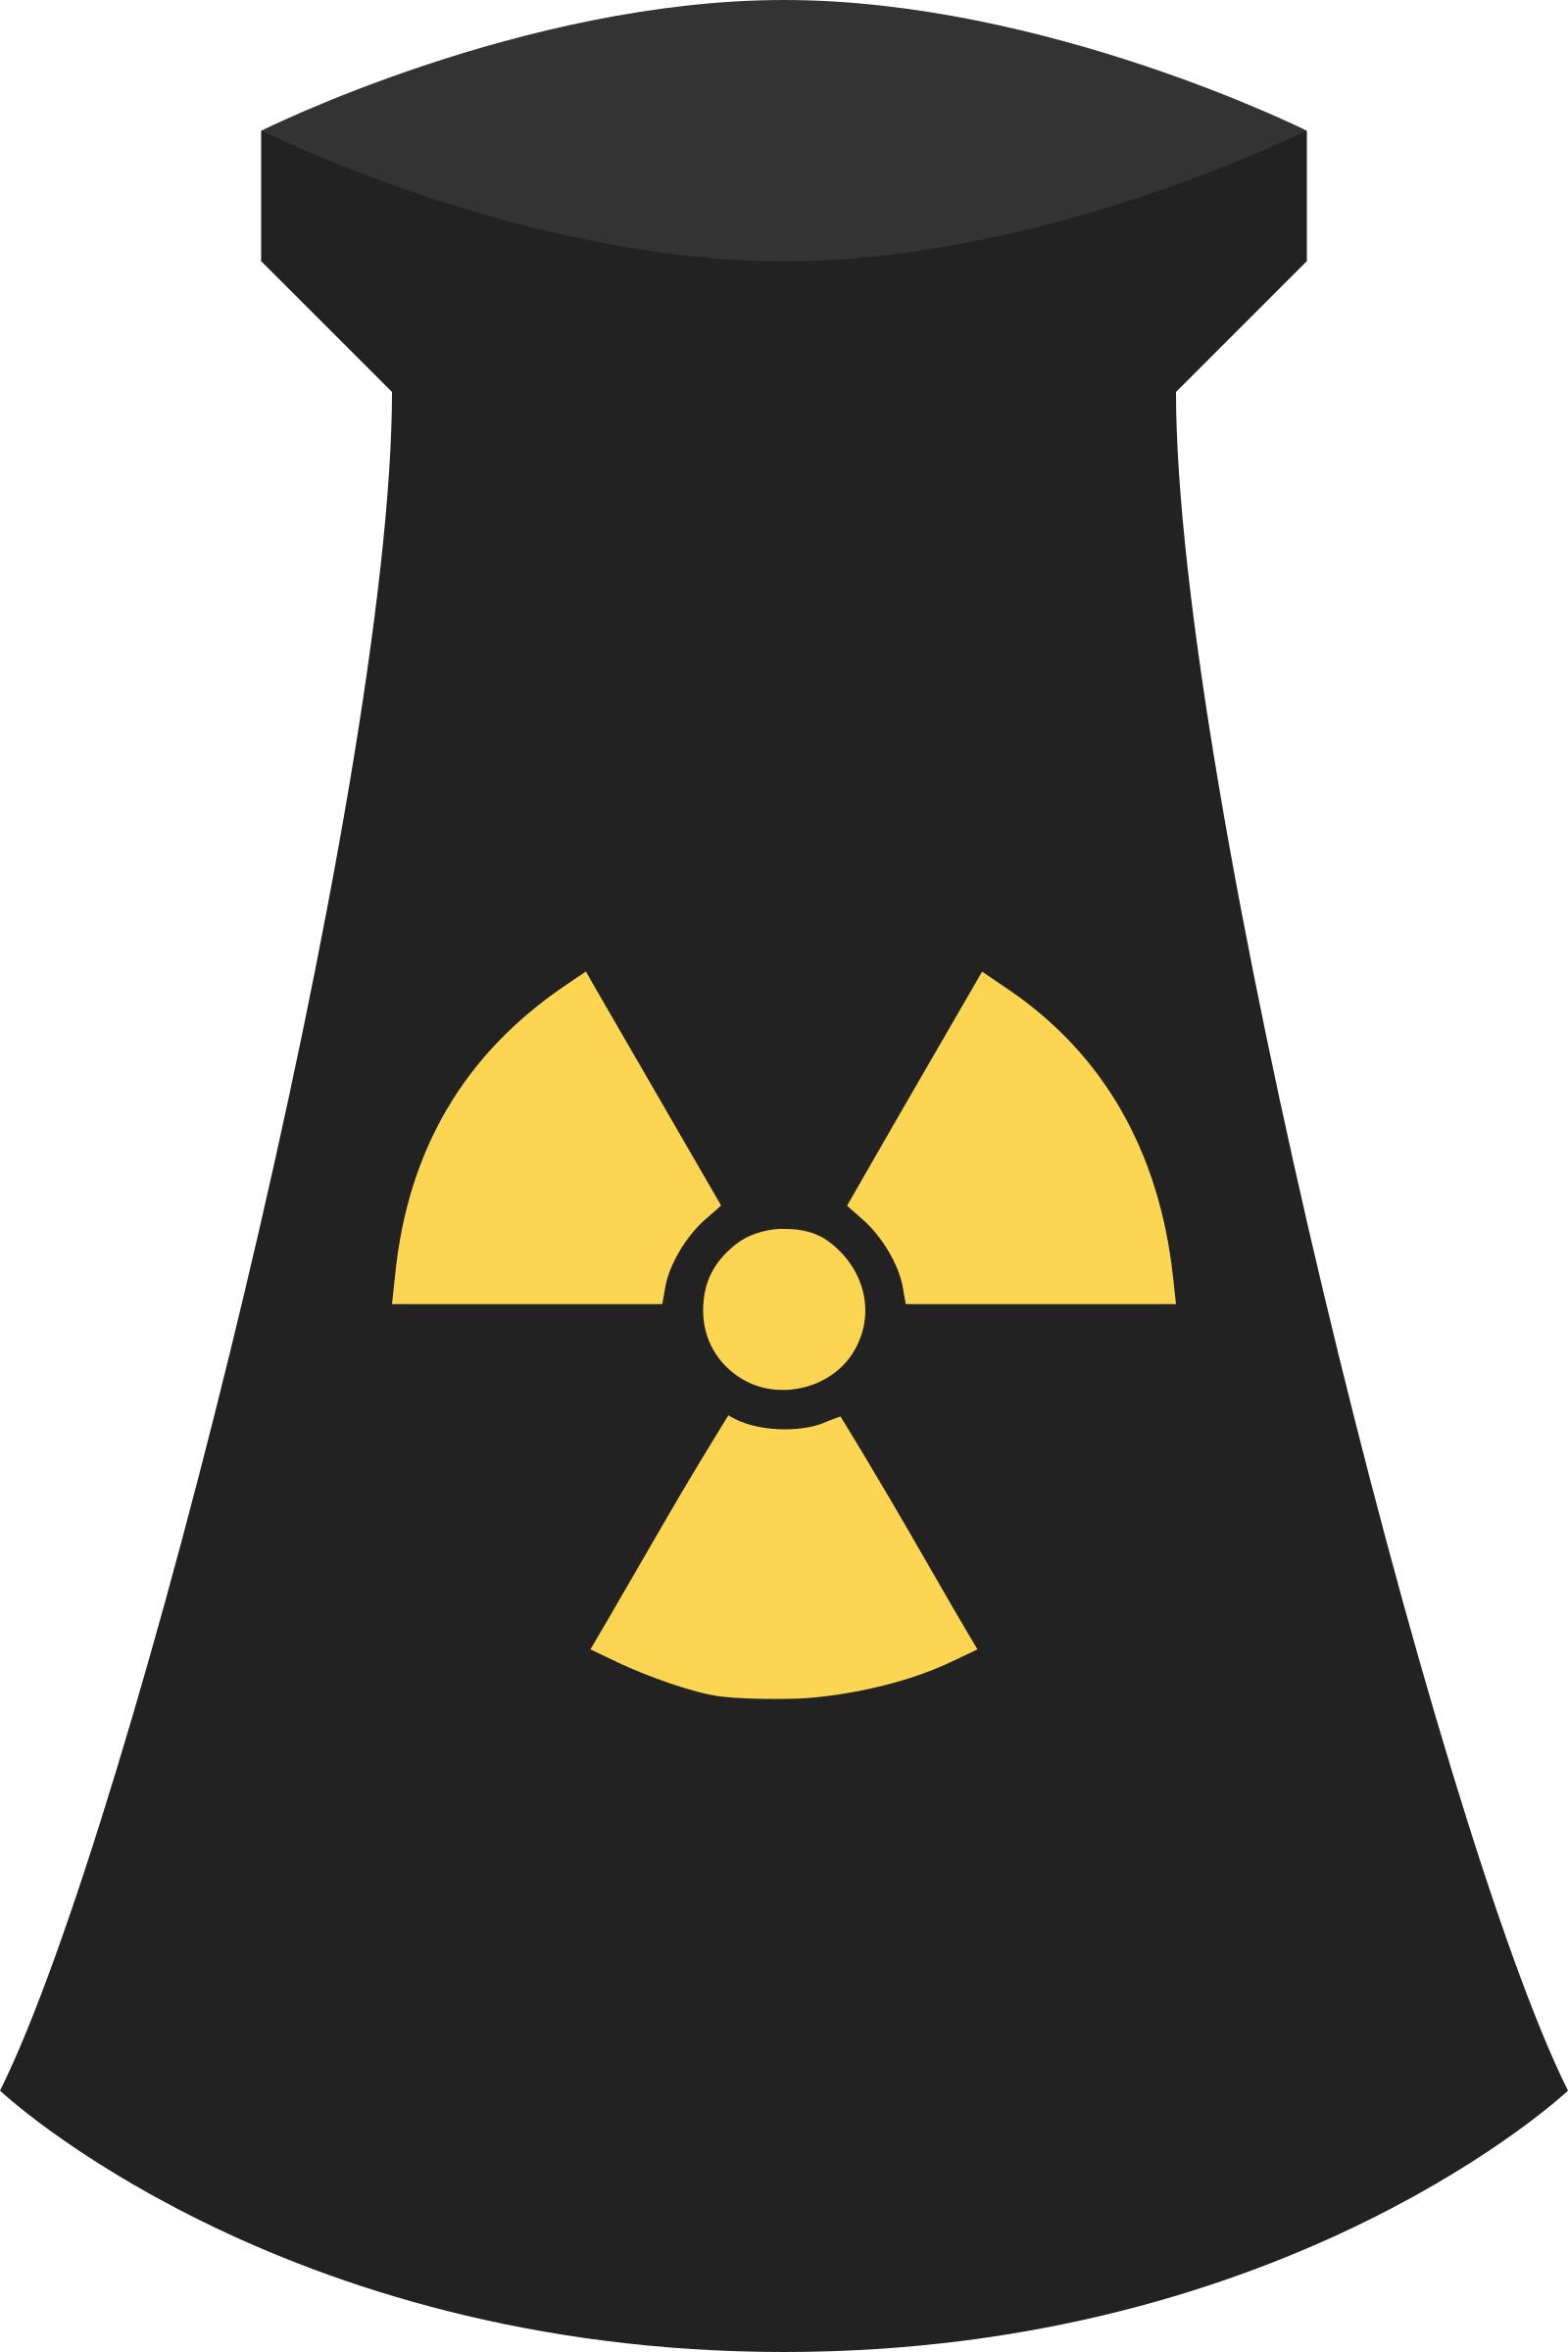 Nuclear Power Plant Icon Symbol 3 png